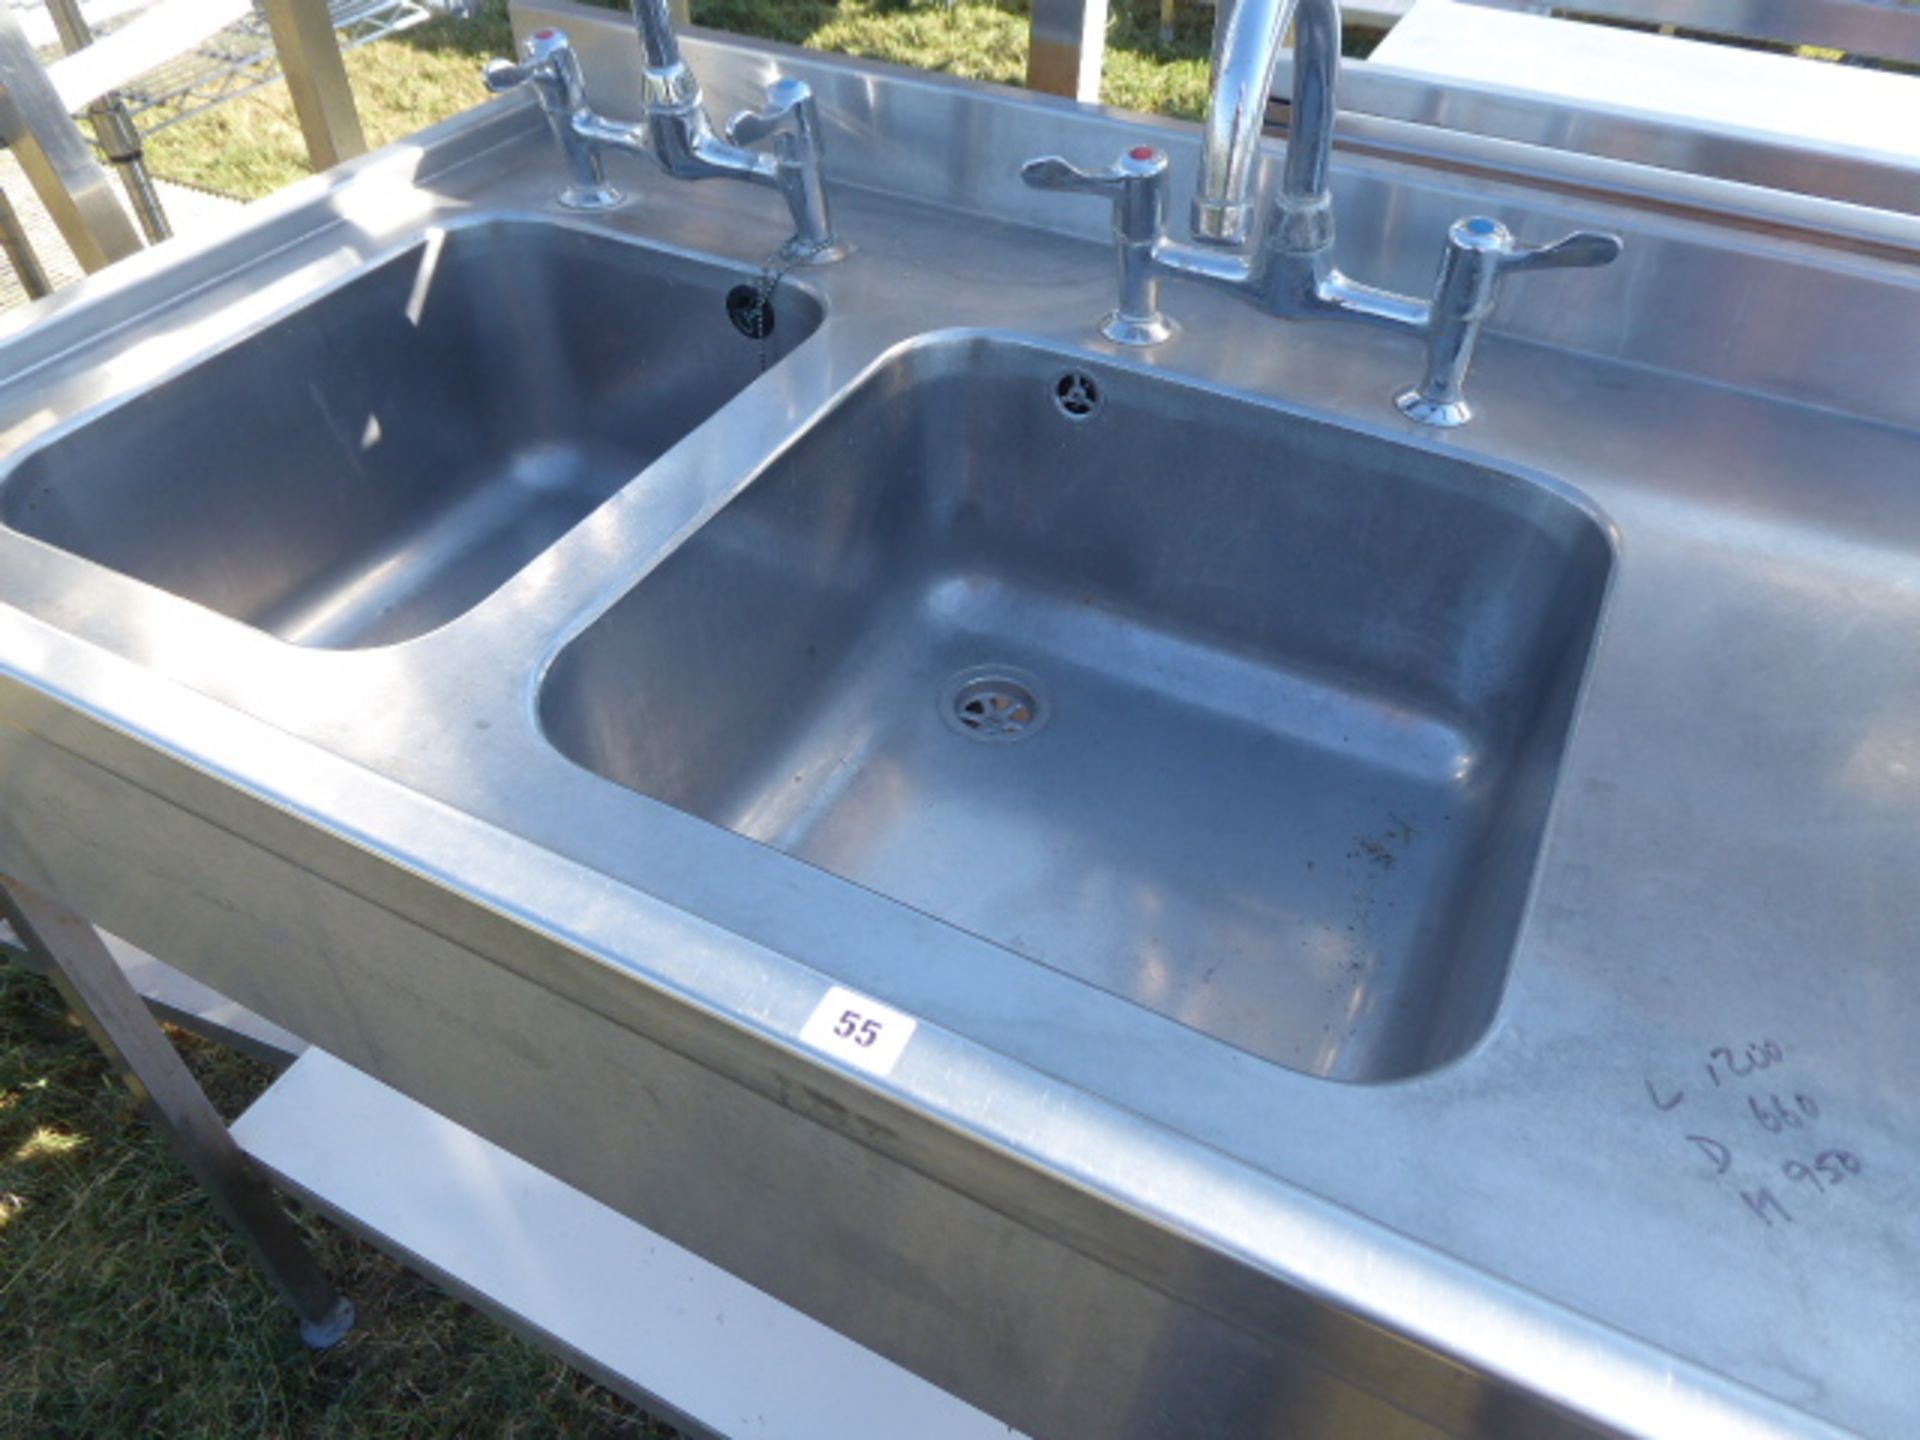 Stainless steel double bowl sink unit with taps, draining board and shelf under, 1200mm wide, - Image 2 of 2